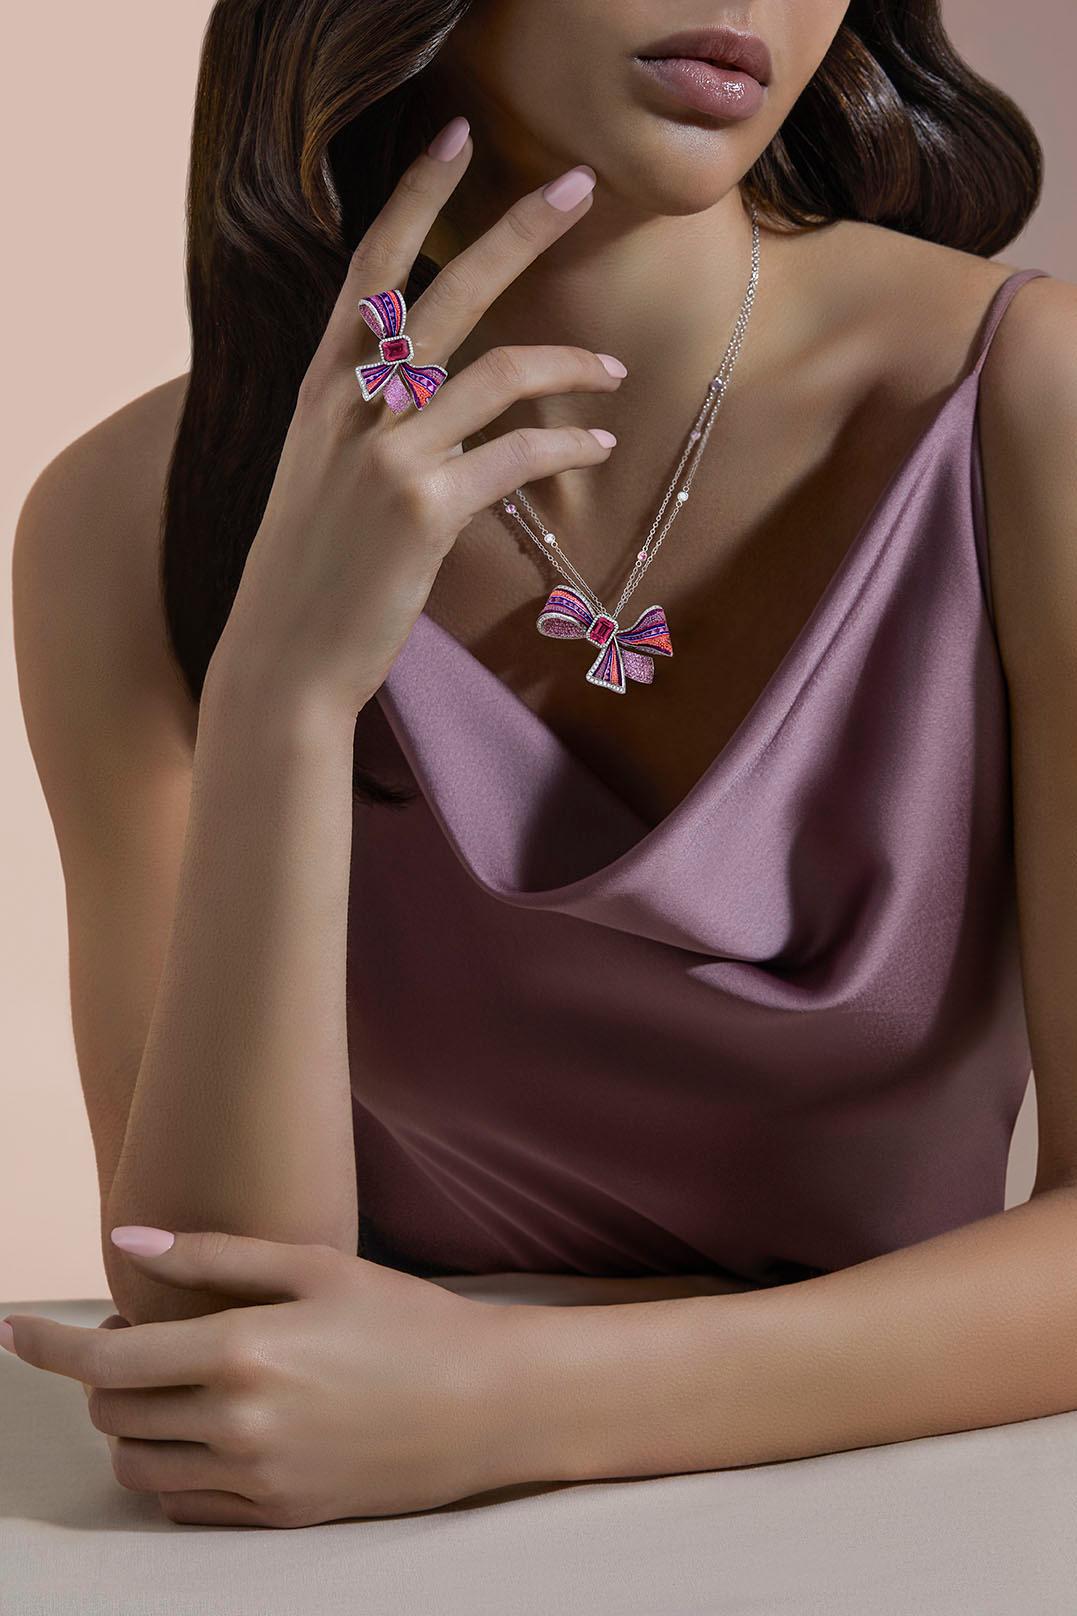 Description

A pink ribbon where micromosaic tiles are used as a special yarn to create this spectacular three-dimensional effect. The central tourmaline gives it additional shine.

Details

White gold 18K, White diamonds 1.47ct, Pink sapphires